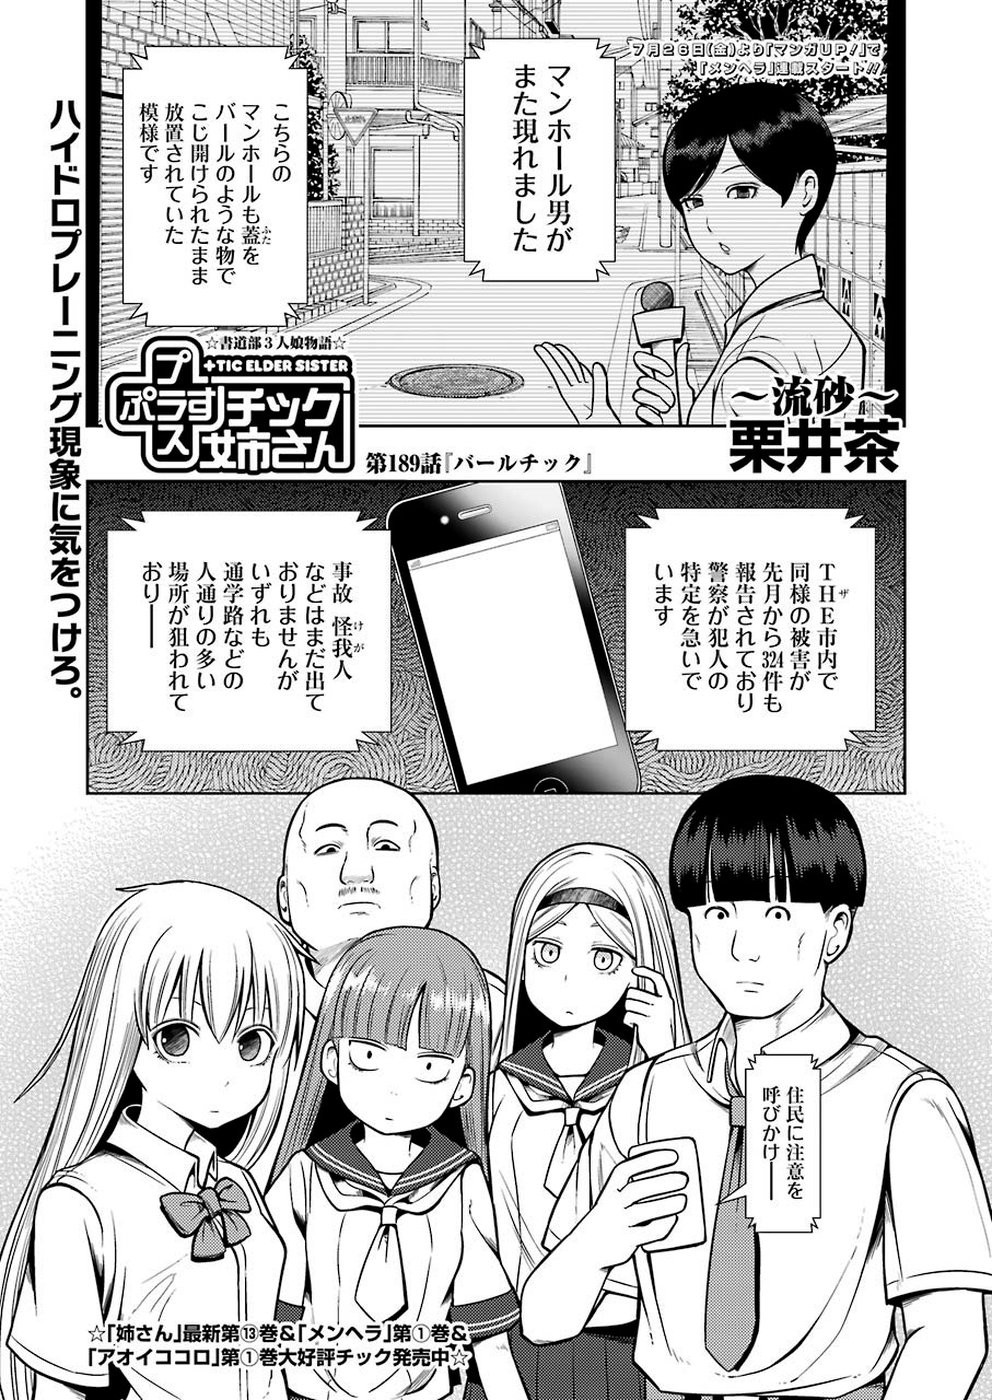 + Tic Nee-san - Chapter 189 - Page 1